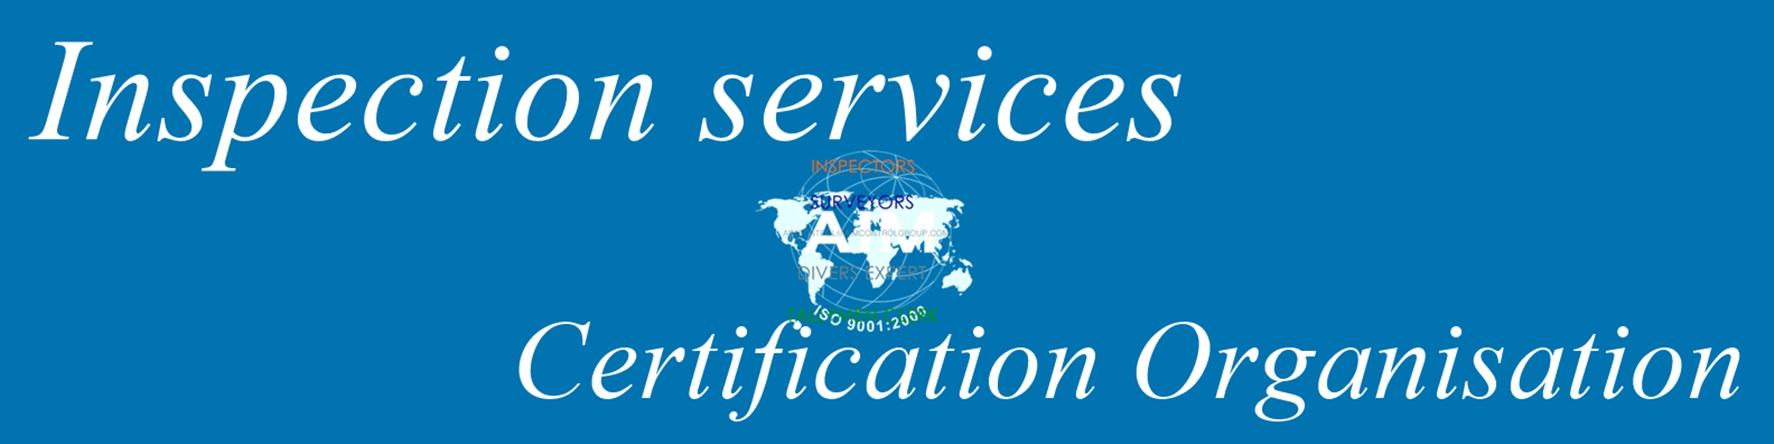 Inspection-certification-services-organisation